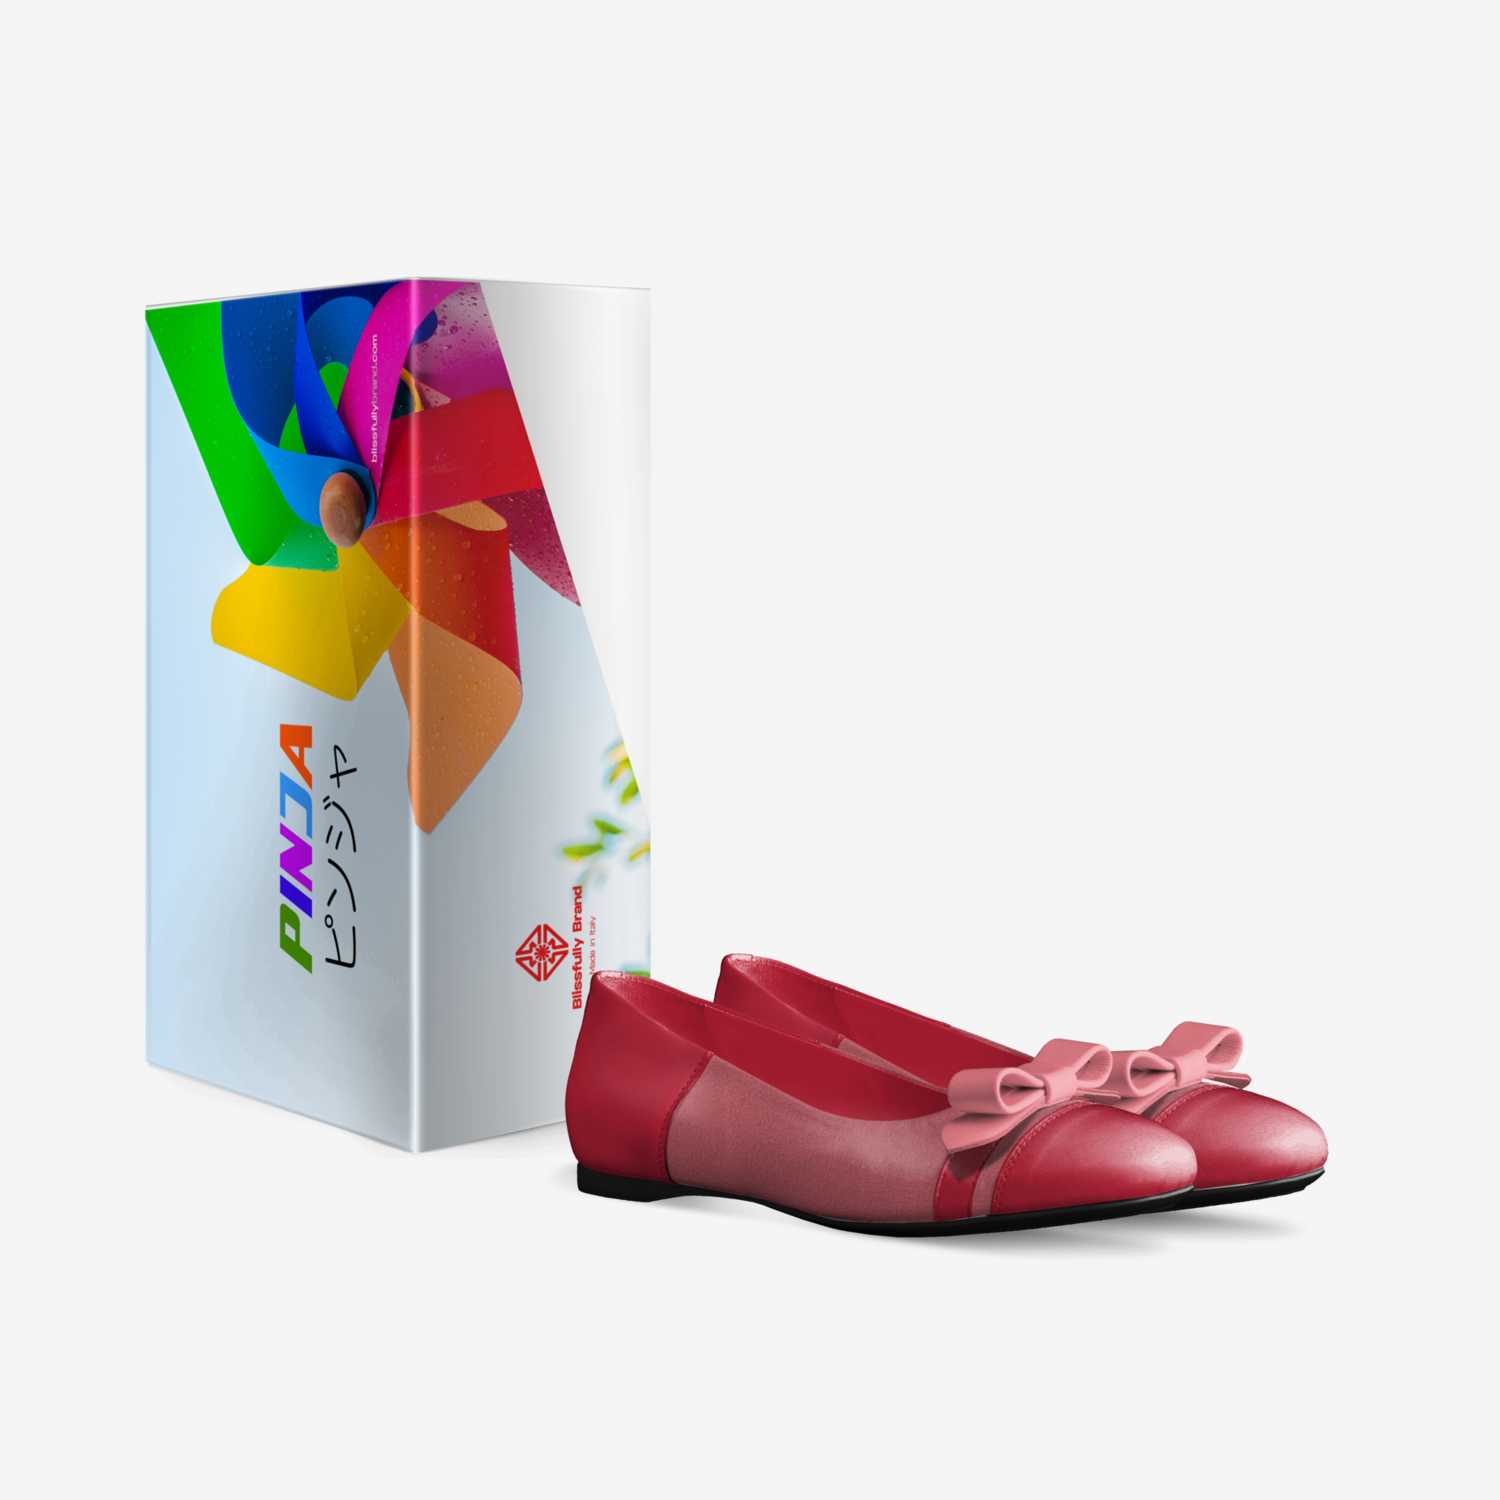 Pinja custom made in Italy shoes by Blissfully Brand | Box view